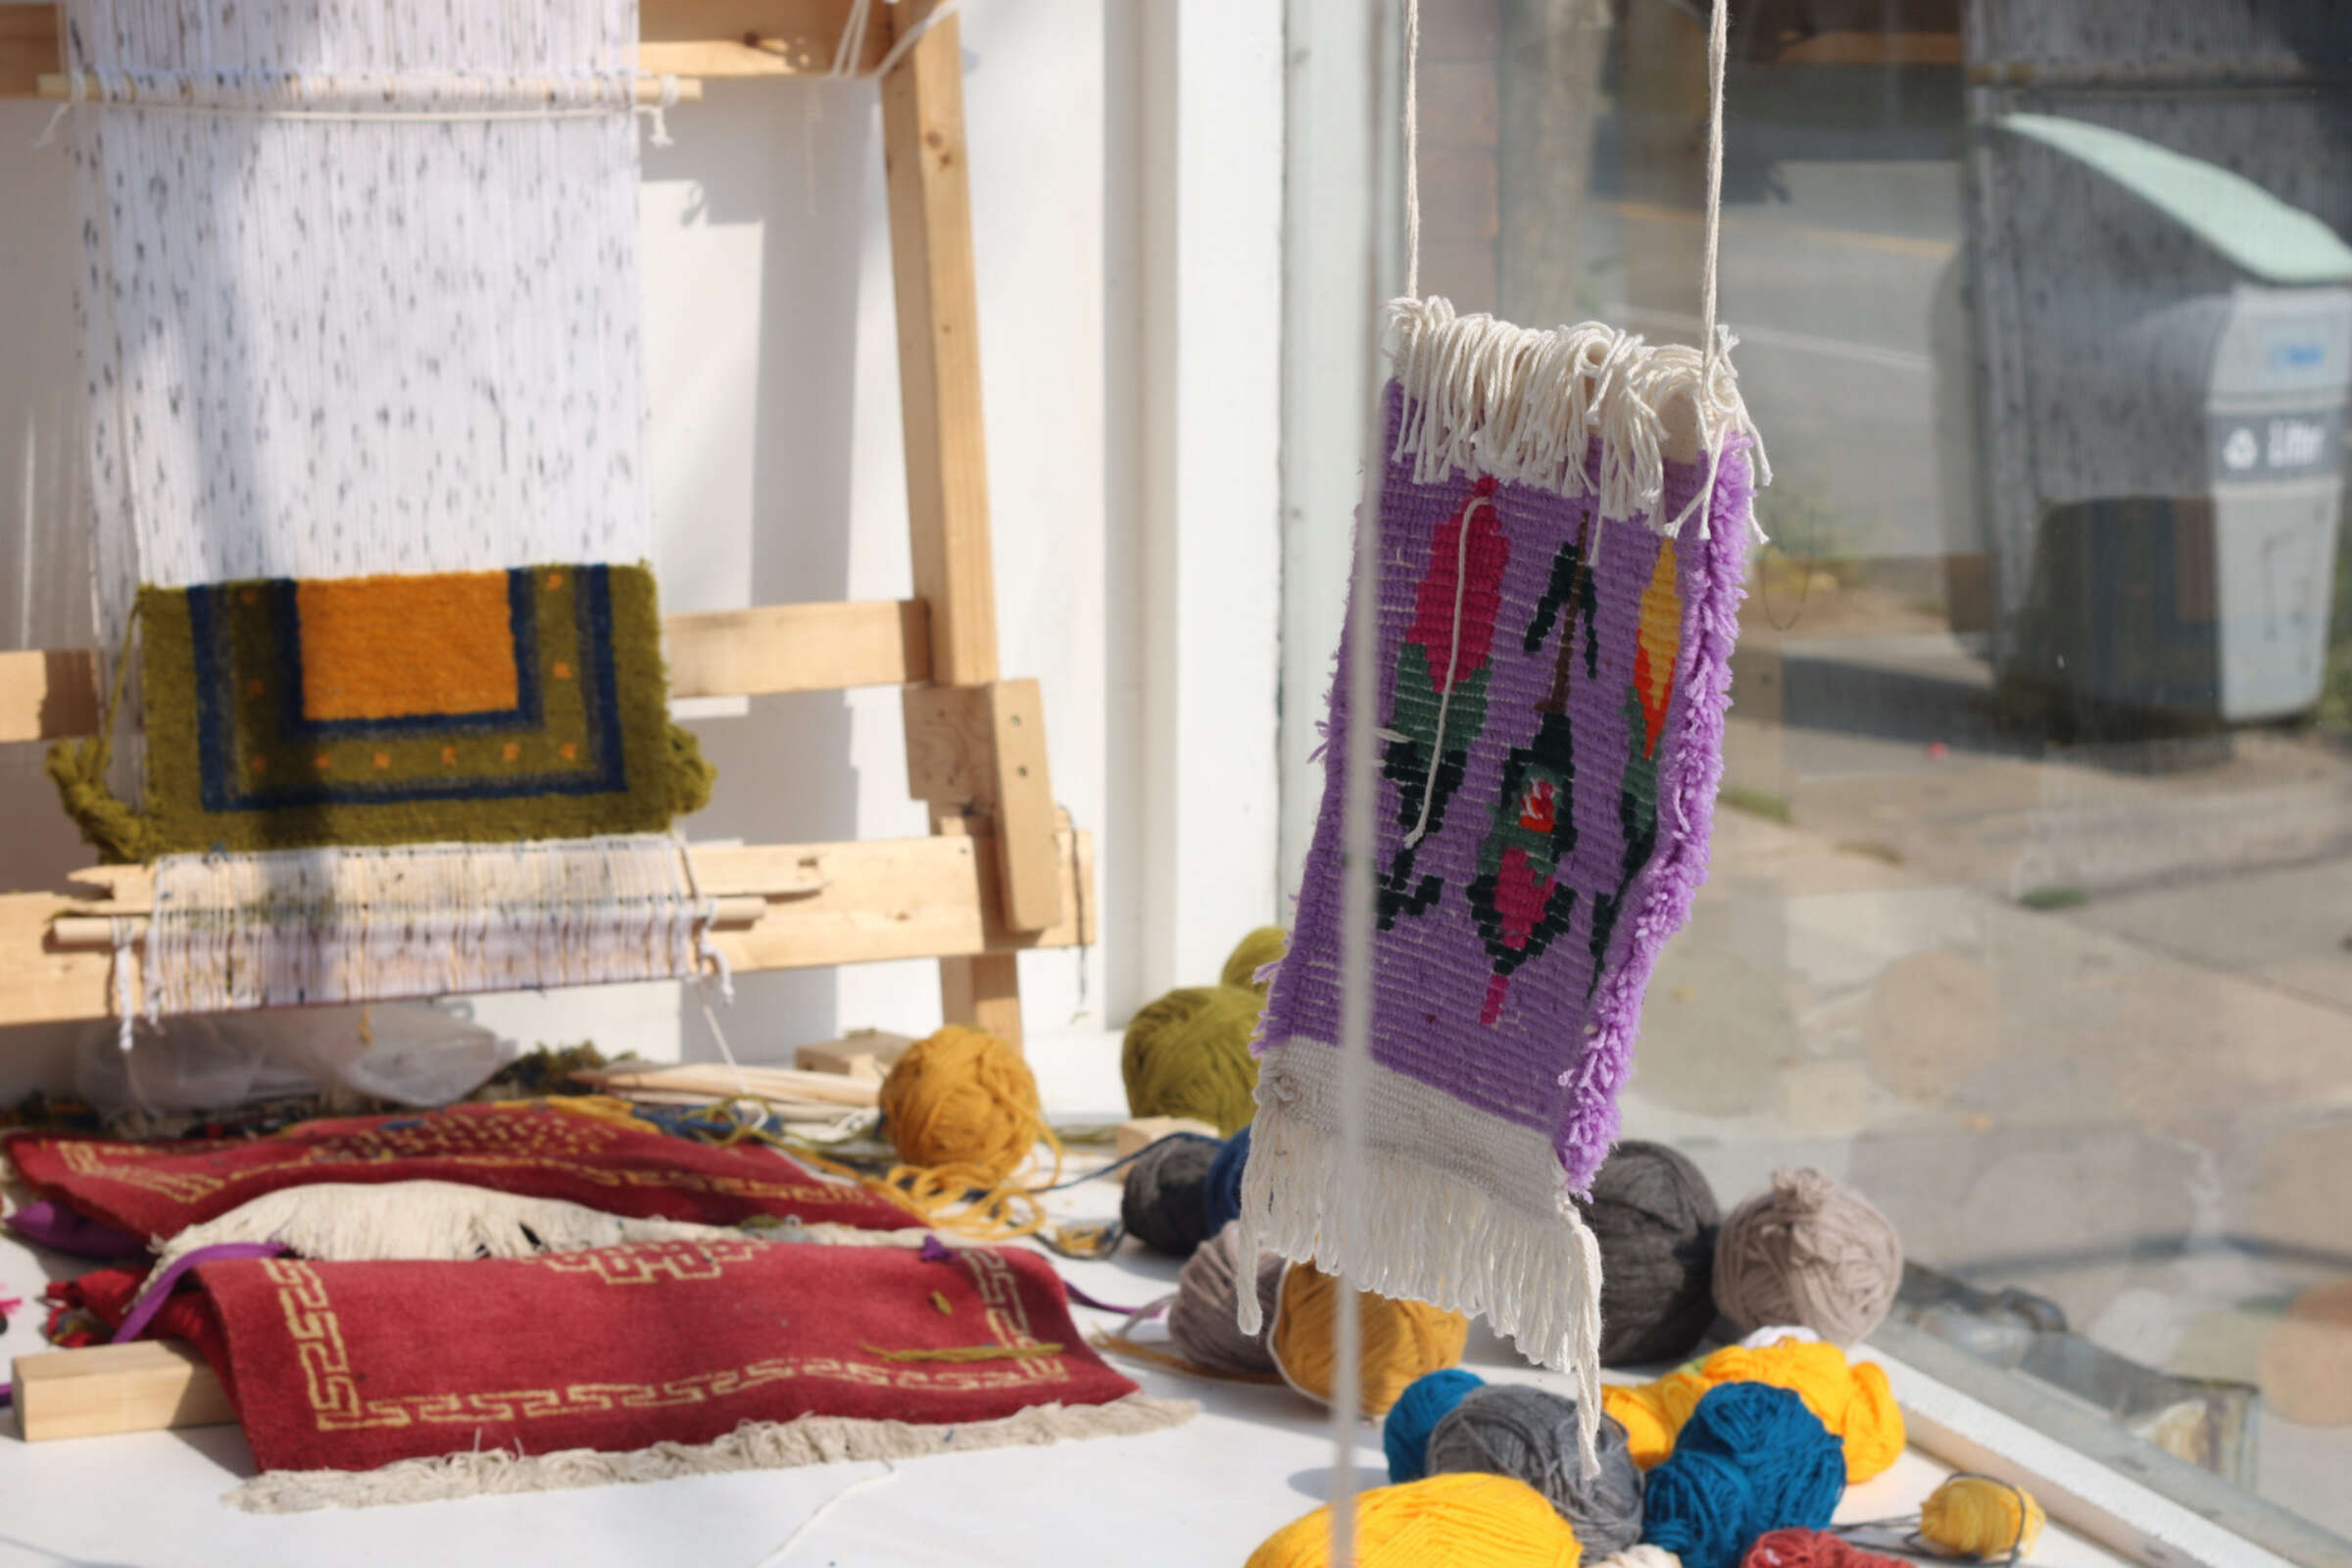 A workshop table displays handmade woven textiles, yarn balls in various colors, and some tools. A tapestry with a purple border and intricate patterns is hanging in the foreground, while other colorful weavings and a loom are visible in the background.